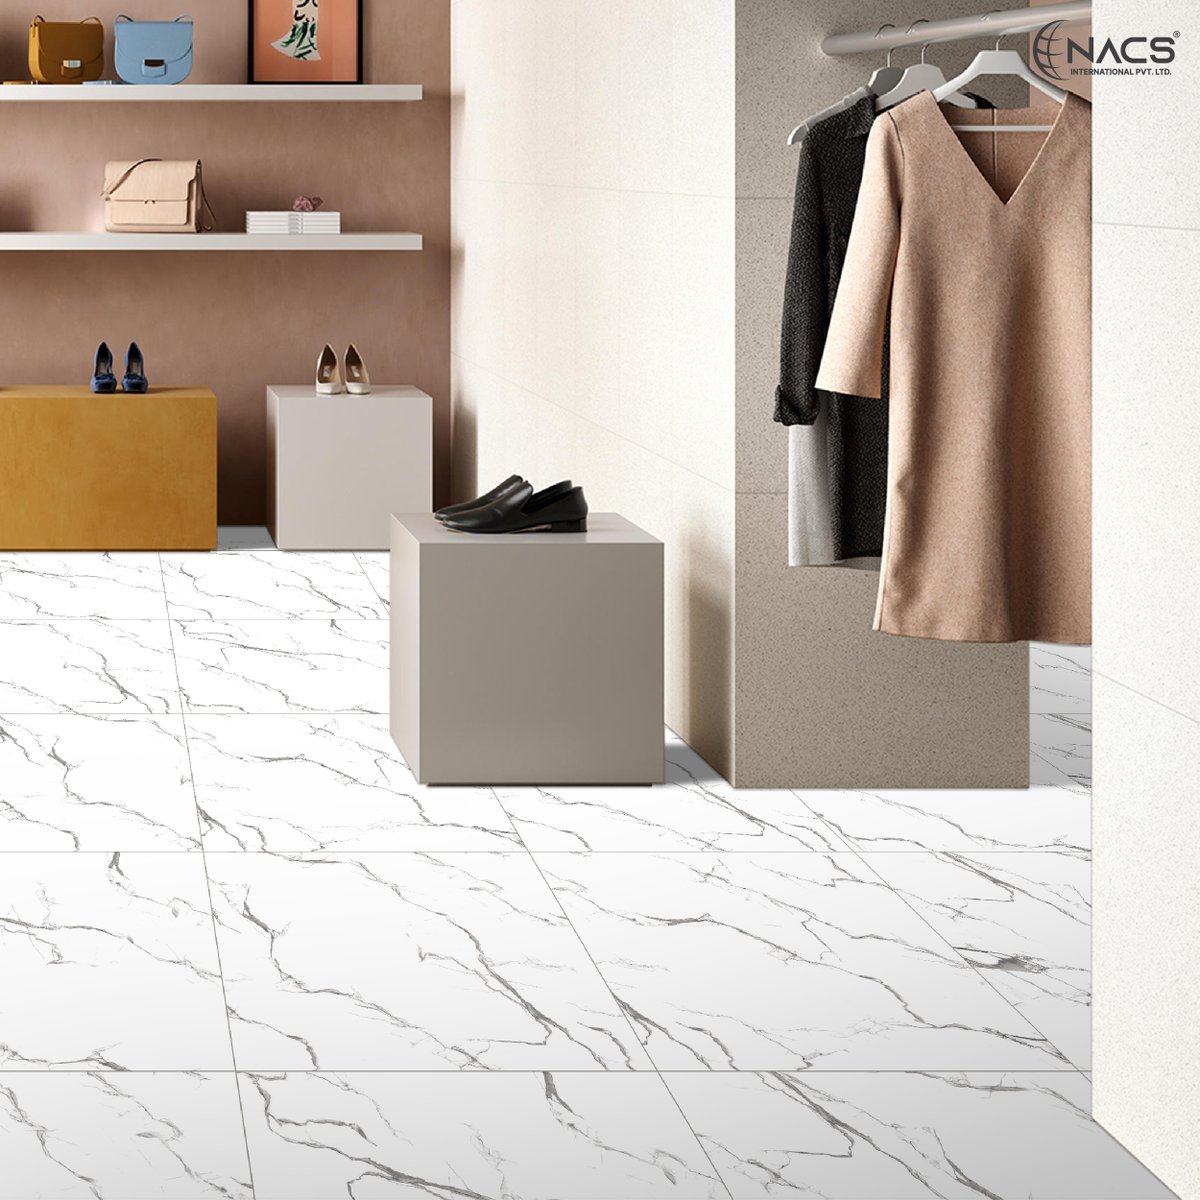 Bring a touch of urban chic to your space with the versatility of GVT Tiles.

#NACSInternational #ExportQuality #GVTTiles #GVTcollection #600x600tiles #interiordesign #GlobalExport #ExportQuality #GlobalExport #InternationalTrade #ExportBusiness #GlobalMarket #ExportingWorldwide